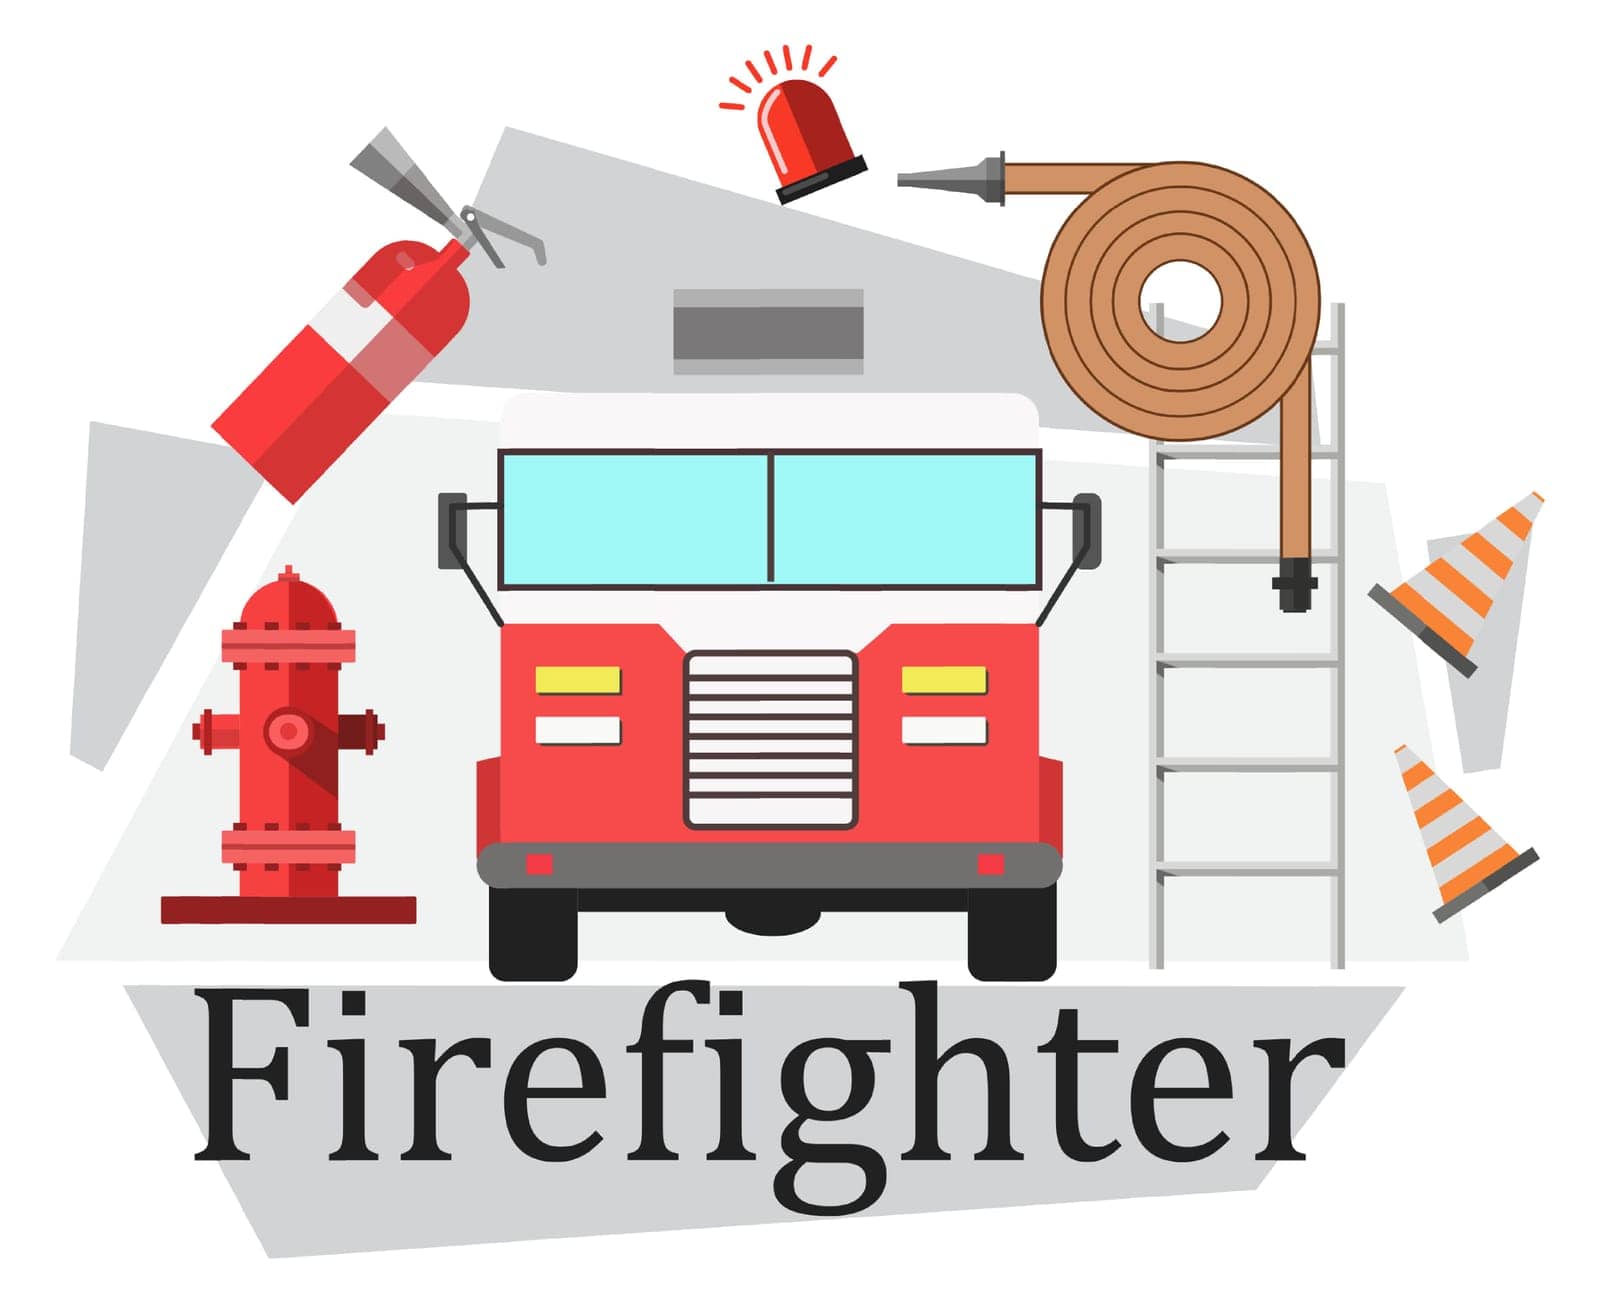 Firefighter brigade and equipment for casualty by Sonulkaster